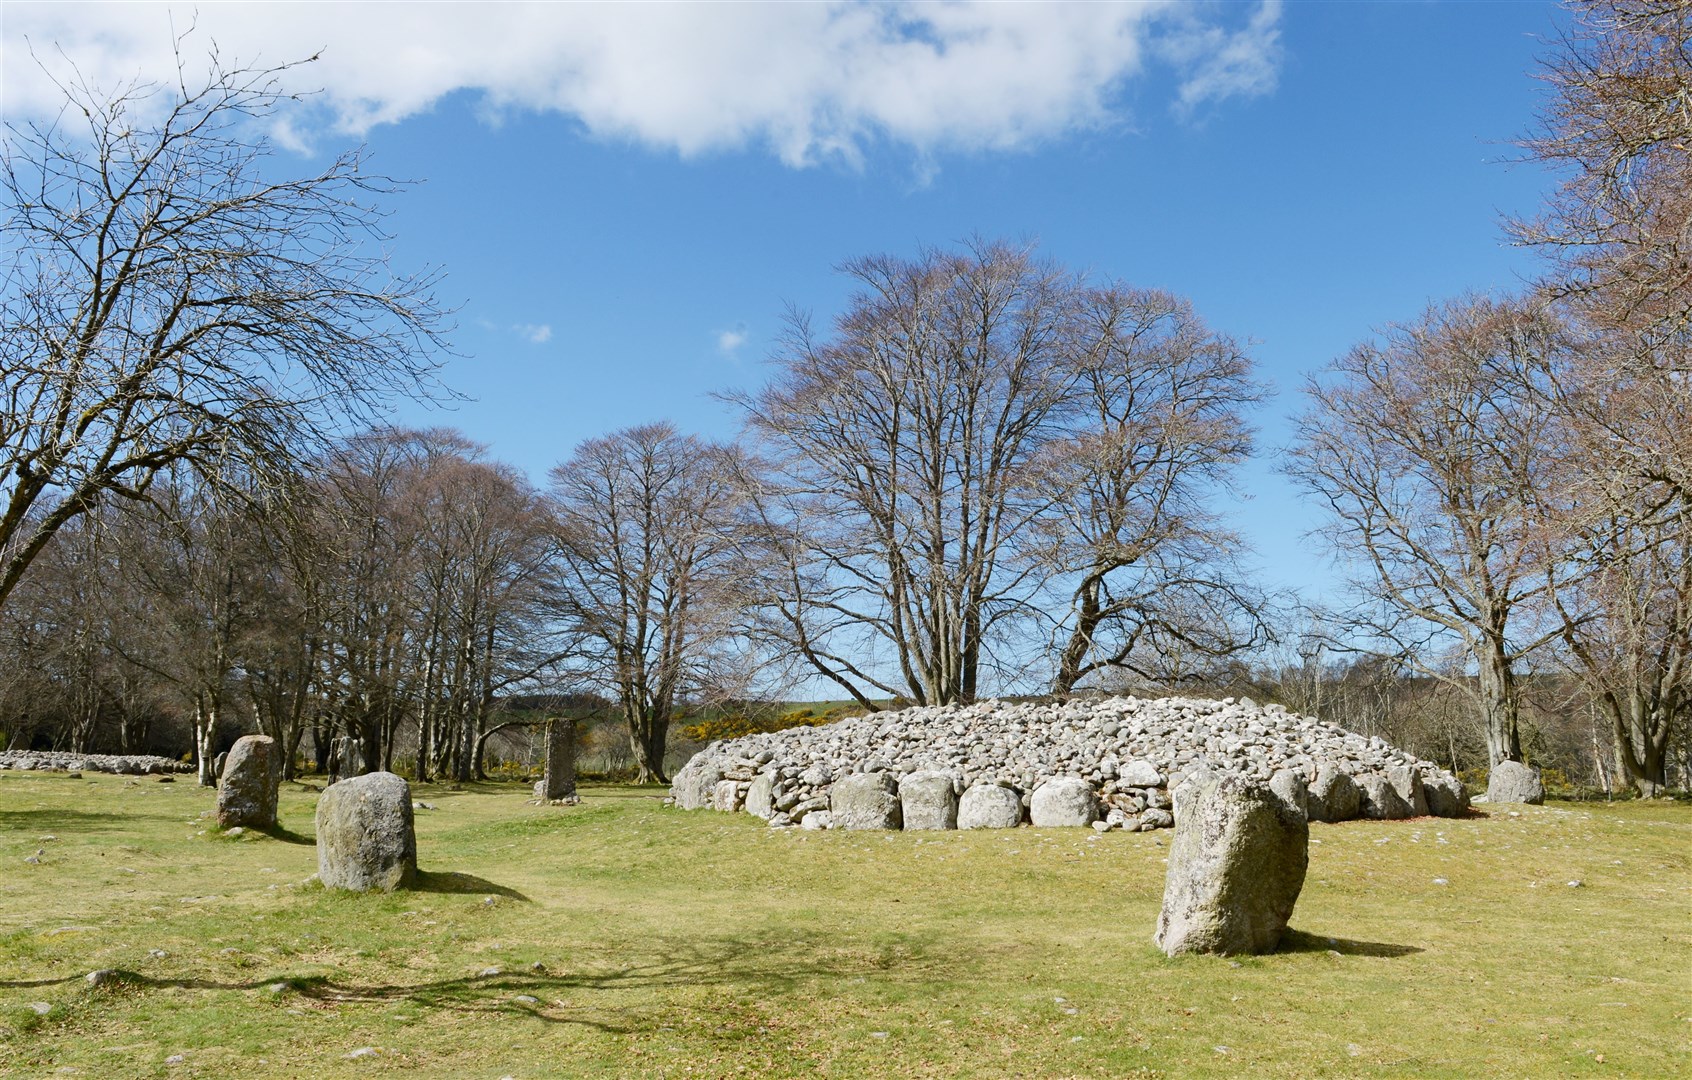 The Clava Cairns.